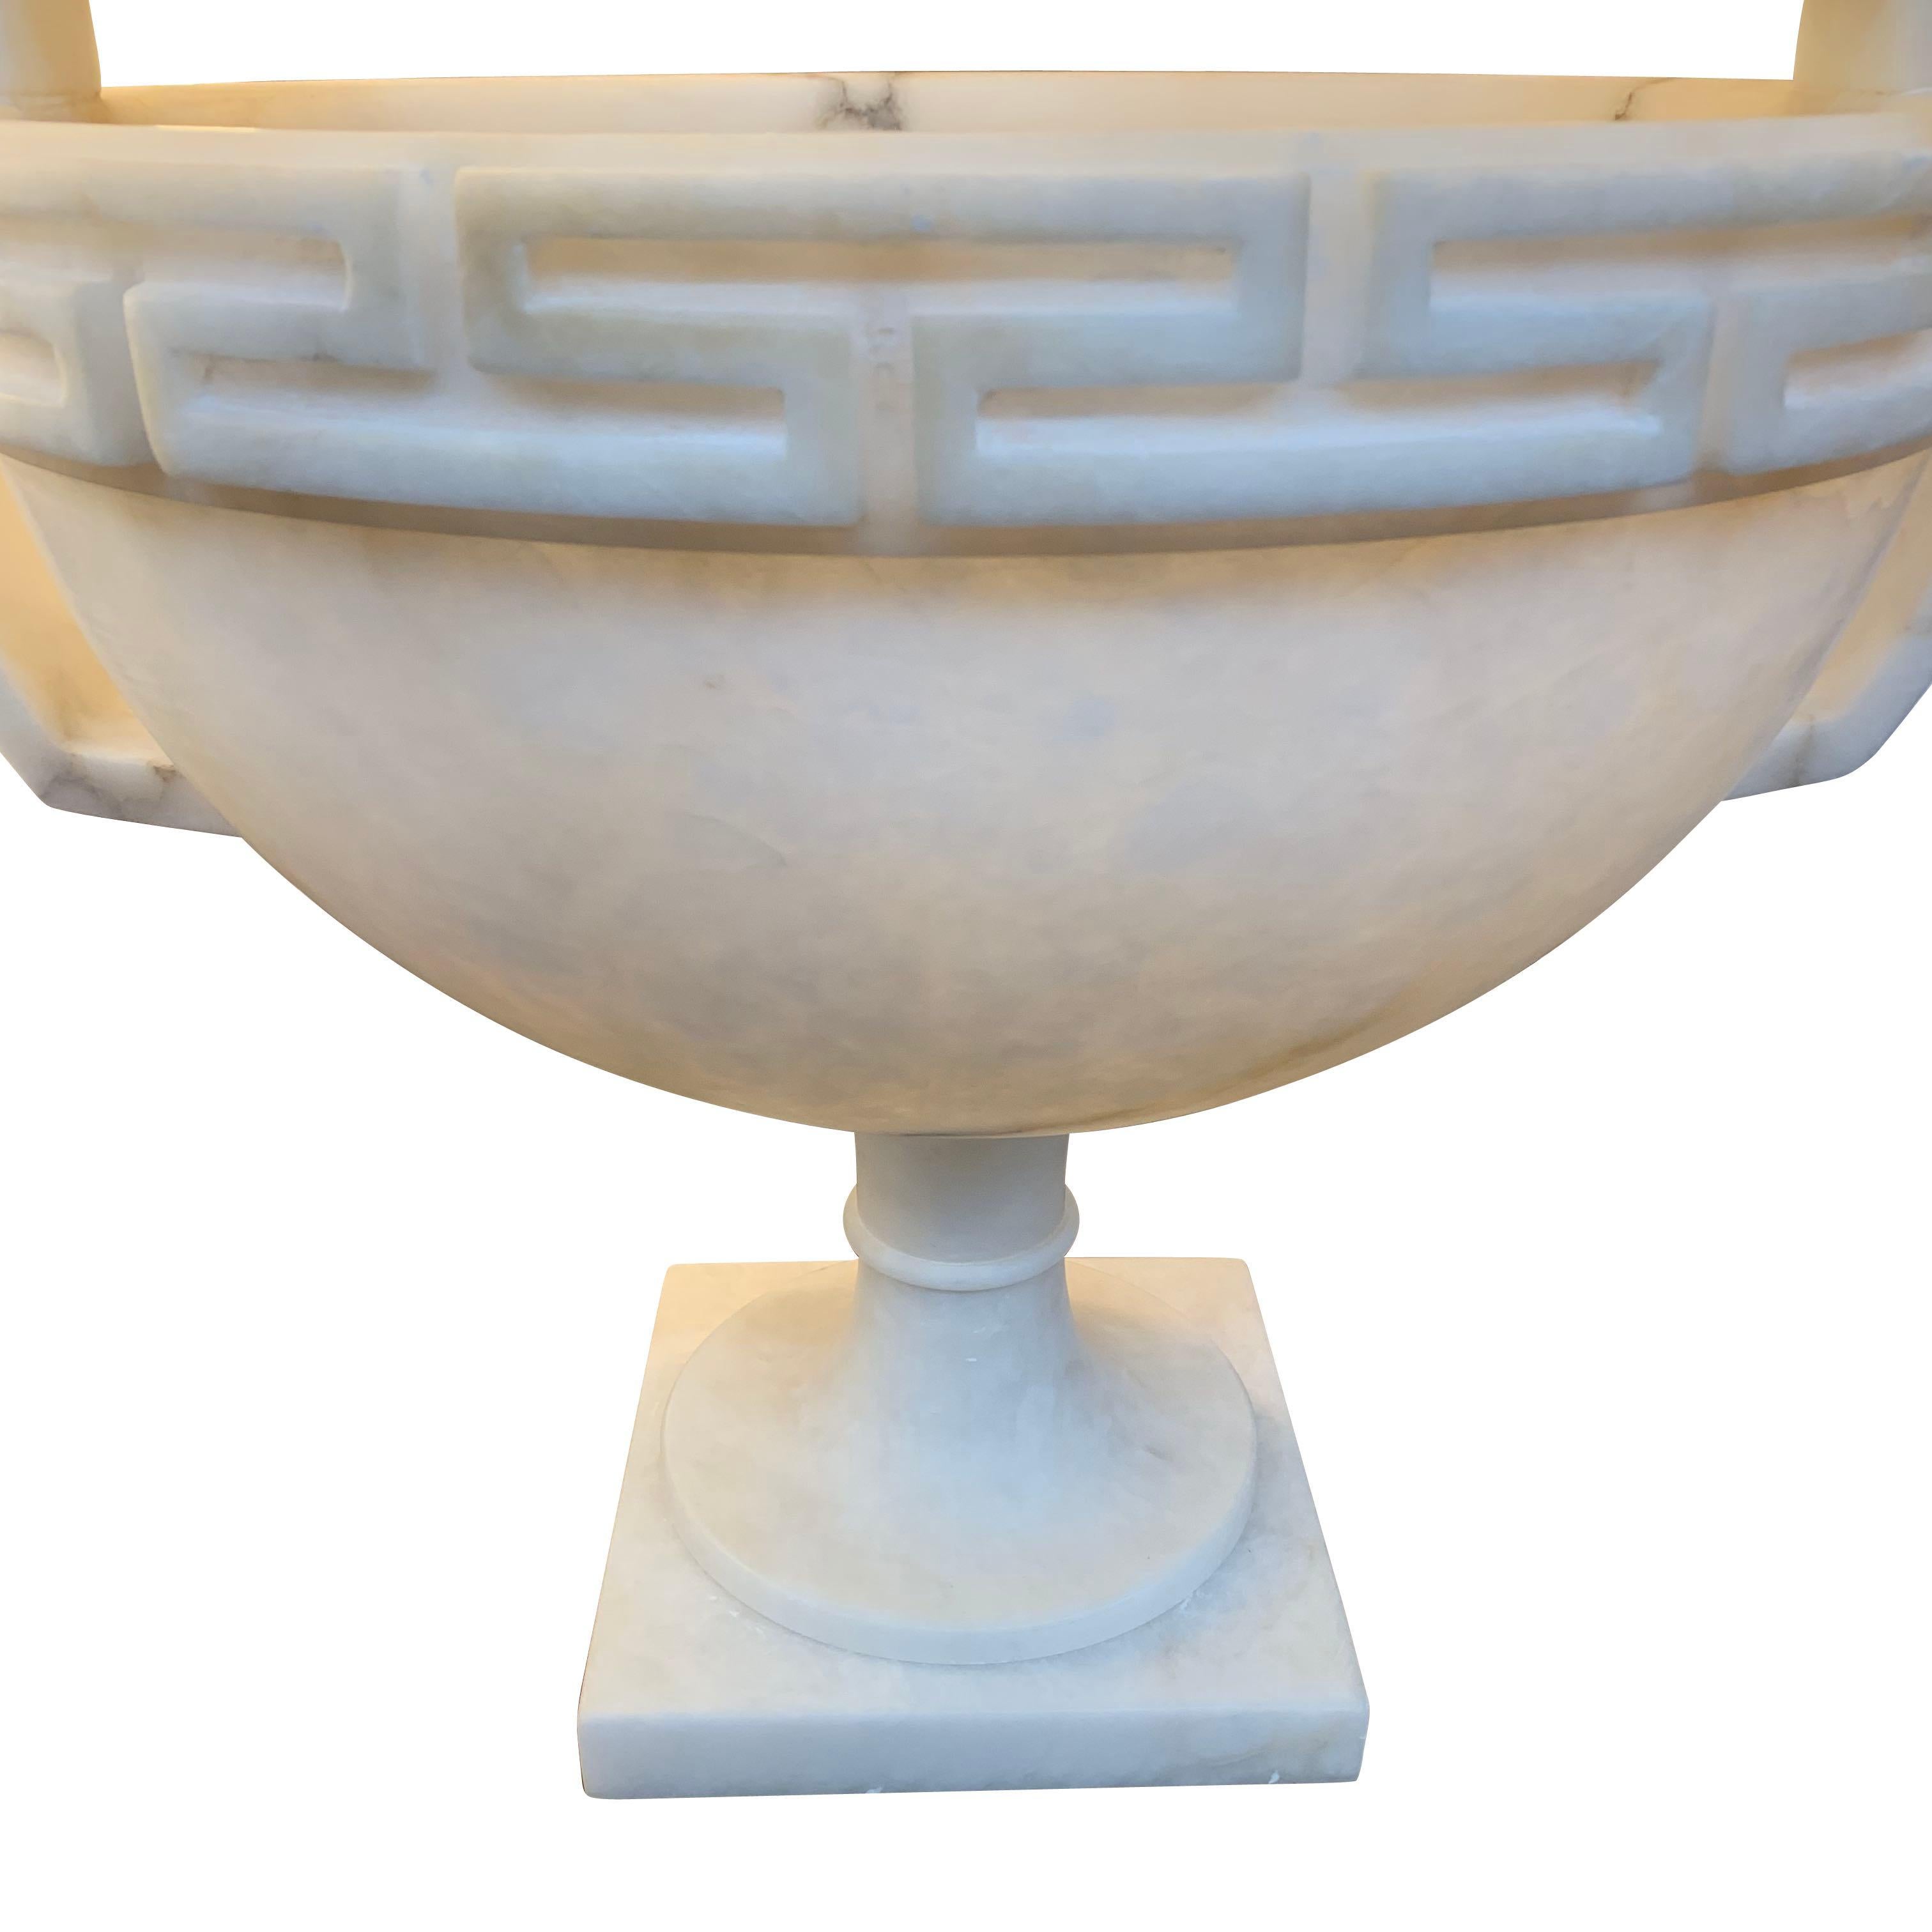 Large footed alabaster bowl with handles and Greek key decorative motif
Base 8